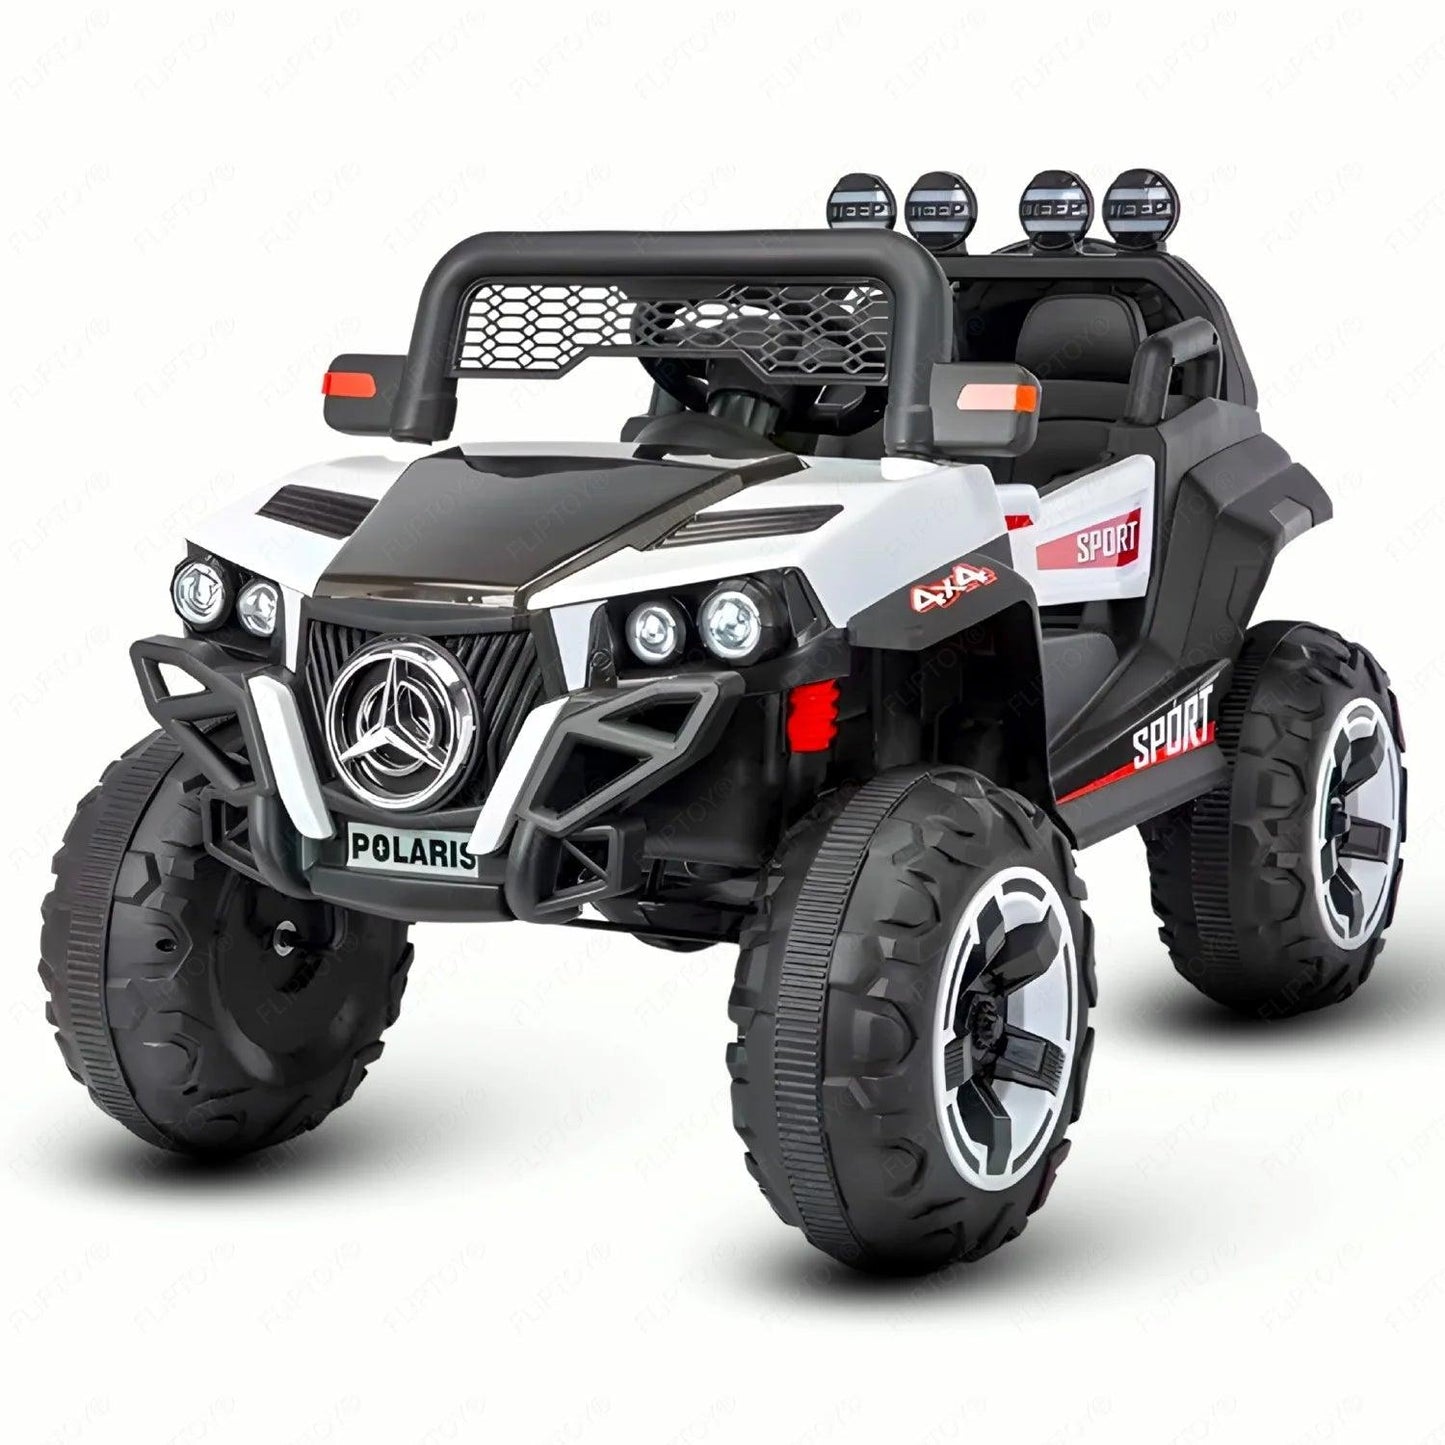 PATOYS | Ride on jeep 4×4 dual seater truck kid ride ons 12v battery operated for Age group 2-6 year - PATOYS